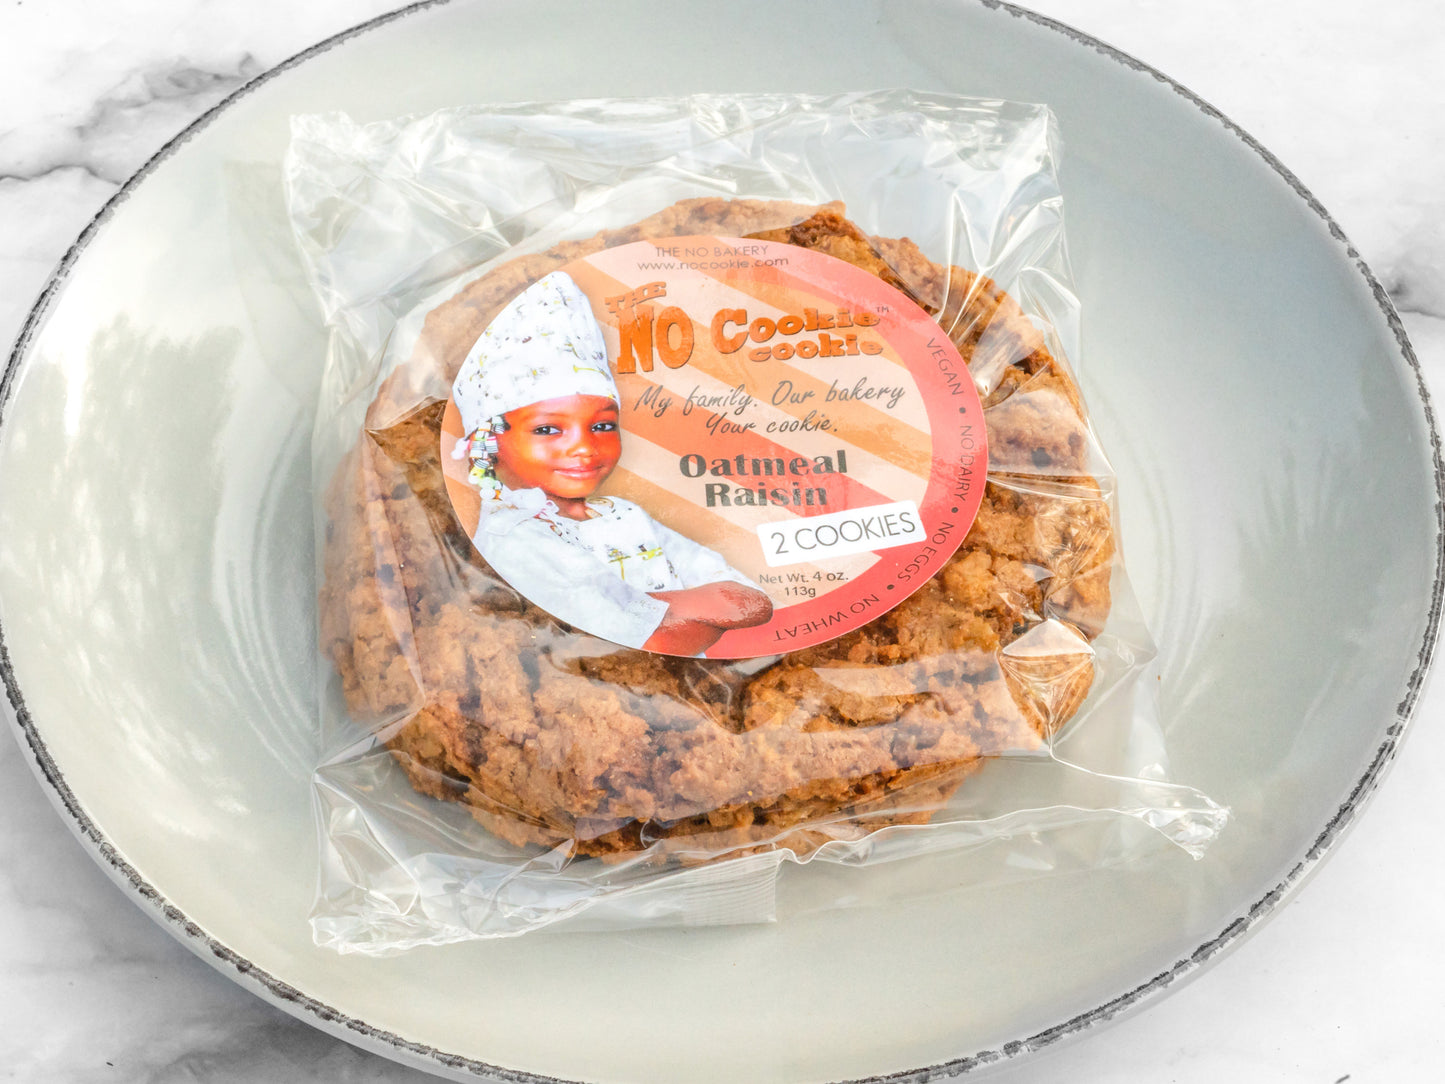 Oatmeal Raisin Cookie - The No Cookie Cookie